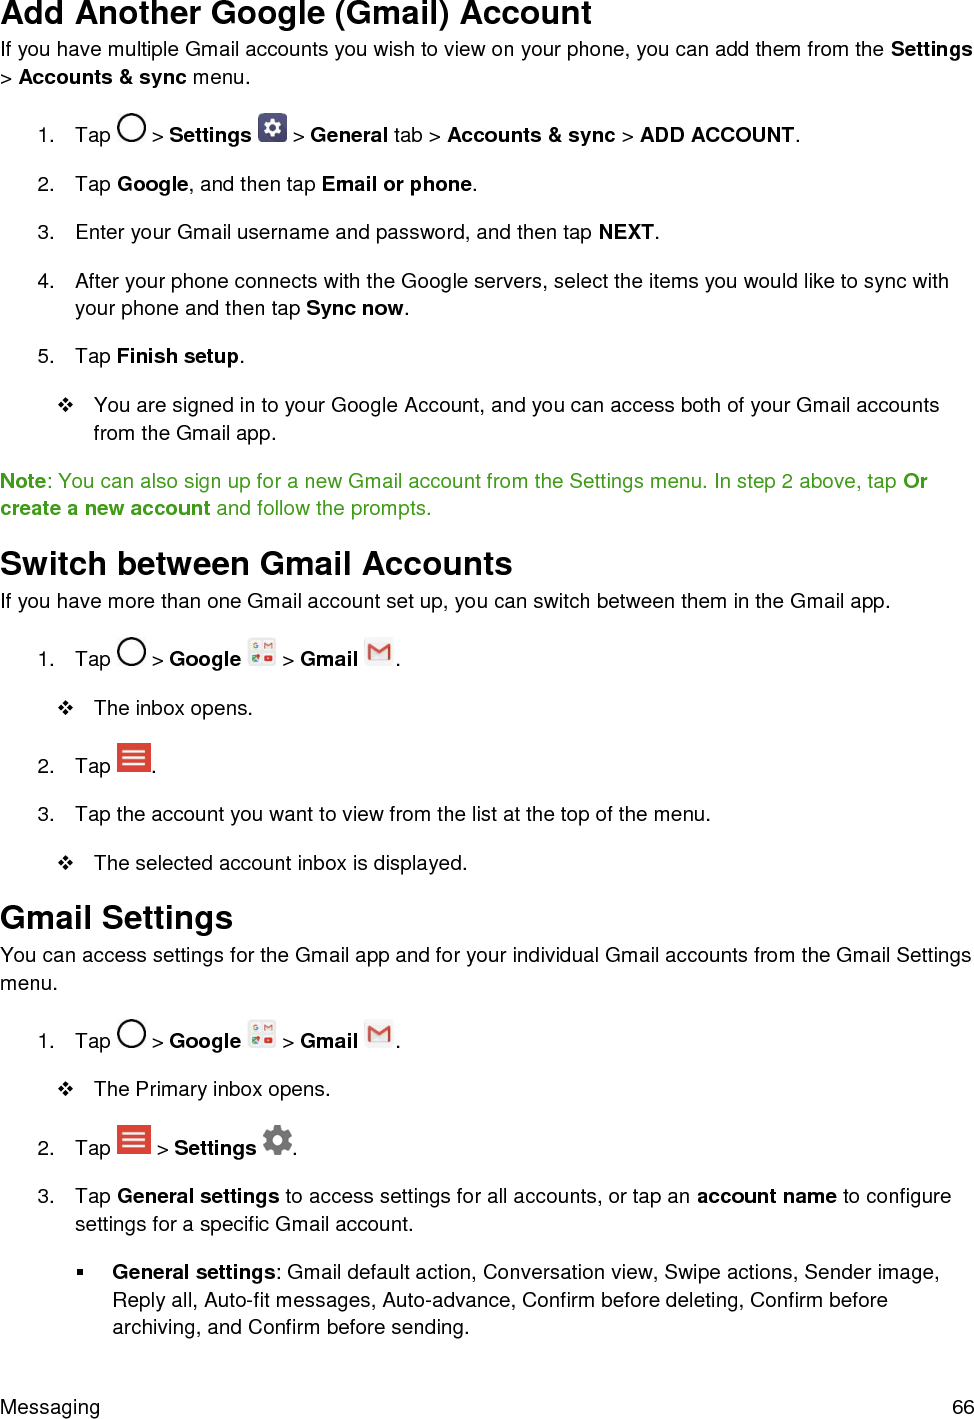  Messaging  66 Add Another Google (Gmail) Account If you have multiple Gmail accounts you wish to view on your phone, you can add them from the Settings &gt; Accounts &amp; sync menu. 1.  Tap   &gt; Settings   &gt; General tab &gt; Accounts &amp; sync &gt; ADD ACCOUNT. 2.  Tap Google, and then tap Email or phone. 3.  Enter your Gmail username and password, and then tap NEXT. 4.  After your phone connects with the Google servers, select the items you would like to sync with your phone and then tap Sync now. 5.  Tap Finish setup.   You are signed in to your Google Account, and you can access both of your Gmail accounts from the Gmail app. Note: You can also sign up for a new Gmail account from the Settings menu. In step 2 above, tap Or create a new account and follow the prompts. Switch between Gmail Accounts If you have more than one Gmail account set up, you can switch between them in the Gmail app. 1.  Tap   &gt; Google   &gt; Gmail  .   The inbox opens. 2.  Tap  . 3.  Tap the account you want to view from the list at the top of the menu.   The selected account inbox is displayed. Gmail Settings You can access settings for the Gmail app and for your individual Gmail accounts from the Gmail Settings menu. 1.  Tap   &gt; Google   &gt; Gmail  .   The Primary inbox opens. 2.  Tap   &gt; Settings  . 3.  Tap General settings to access settings for all accounts, or tap an account name to configure settings for a specific Gmail account.  General settings: Gmail default action, Conversation view, Swipe actions, Sender image, Reply all, Auto-fit messages, Auto-advance, Confirm before deleting, Confirm before archiving, and Confirm before sending. 